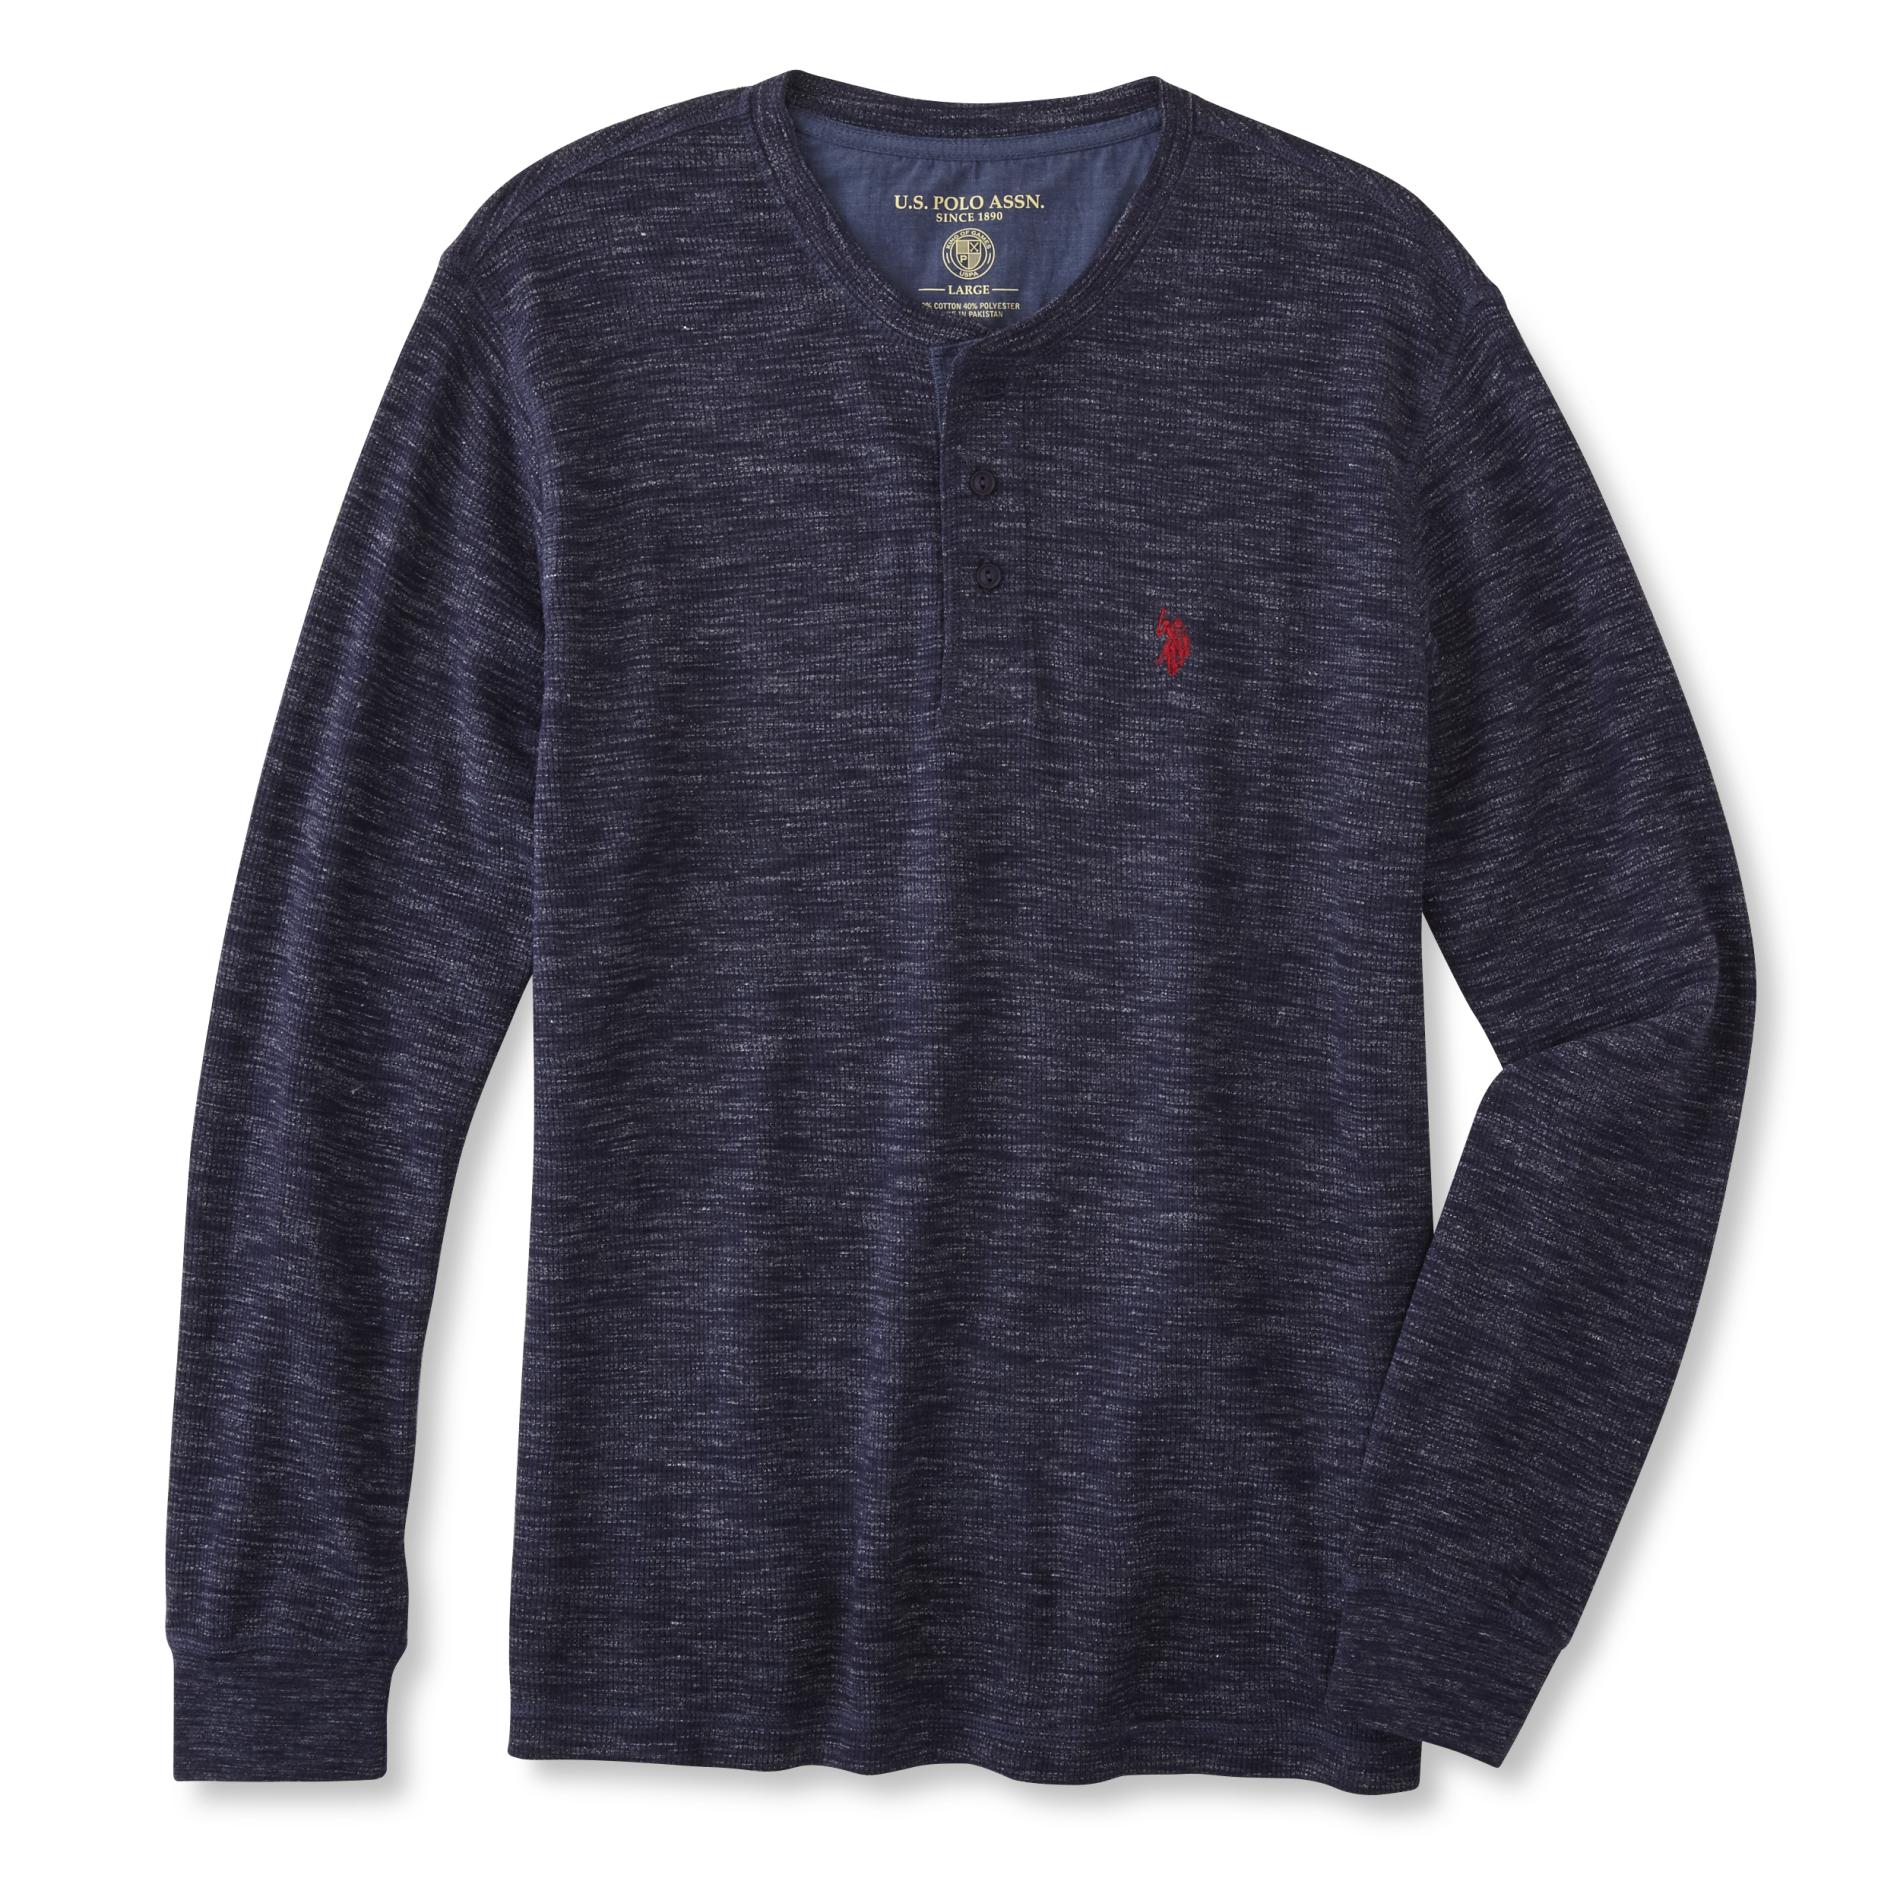 U.S. Polo Assn. Men's Thermal Henley Shirt - Space-Dyed